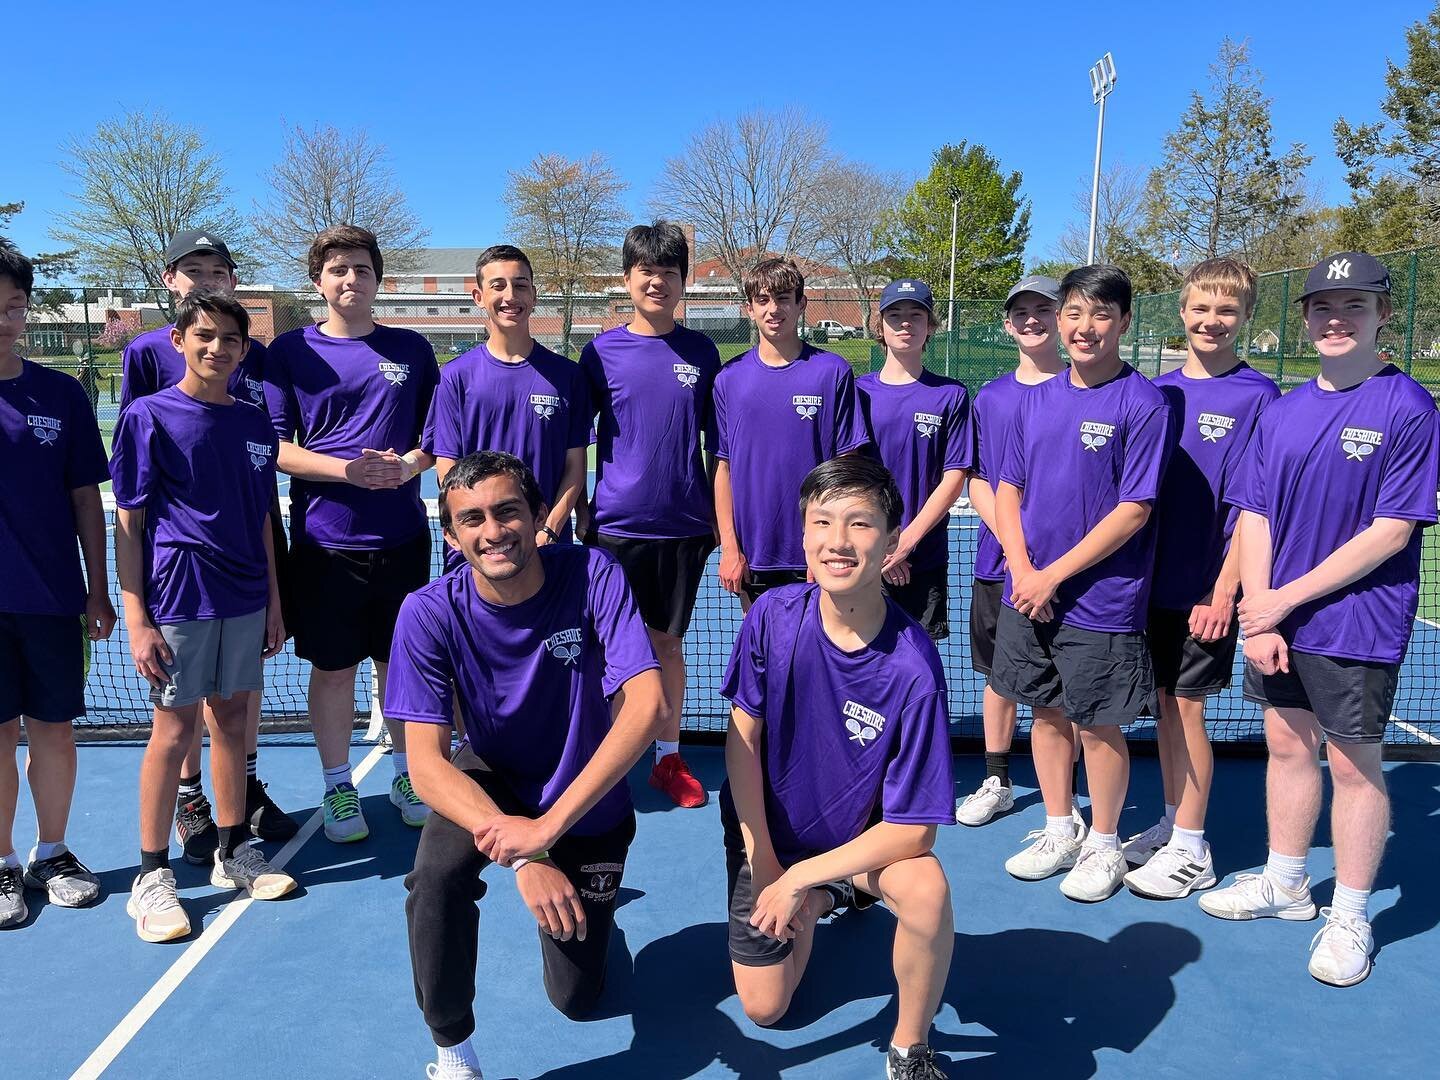 Looking like a BEAUTIFUL day in Cheshire, CT for the CHS Boy&rsquo;s Tennis Play in purple match!!

Good Luck RAMS!💜🐏&hearts;️